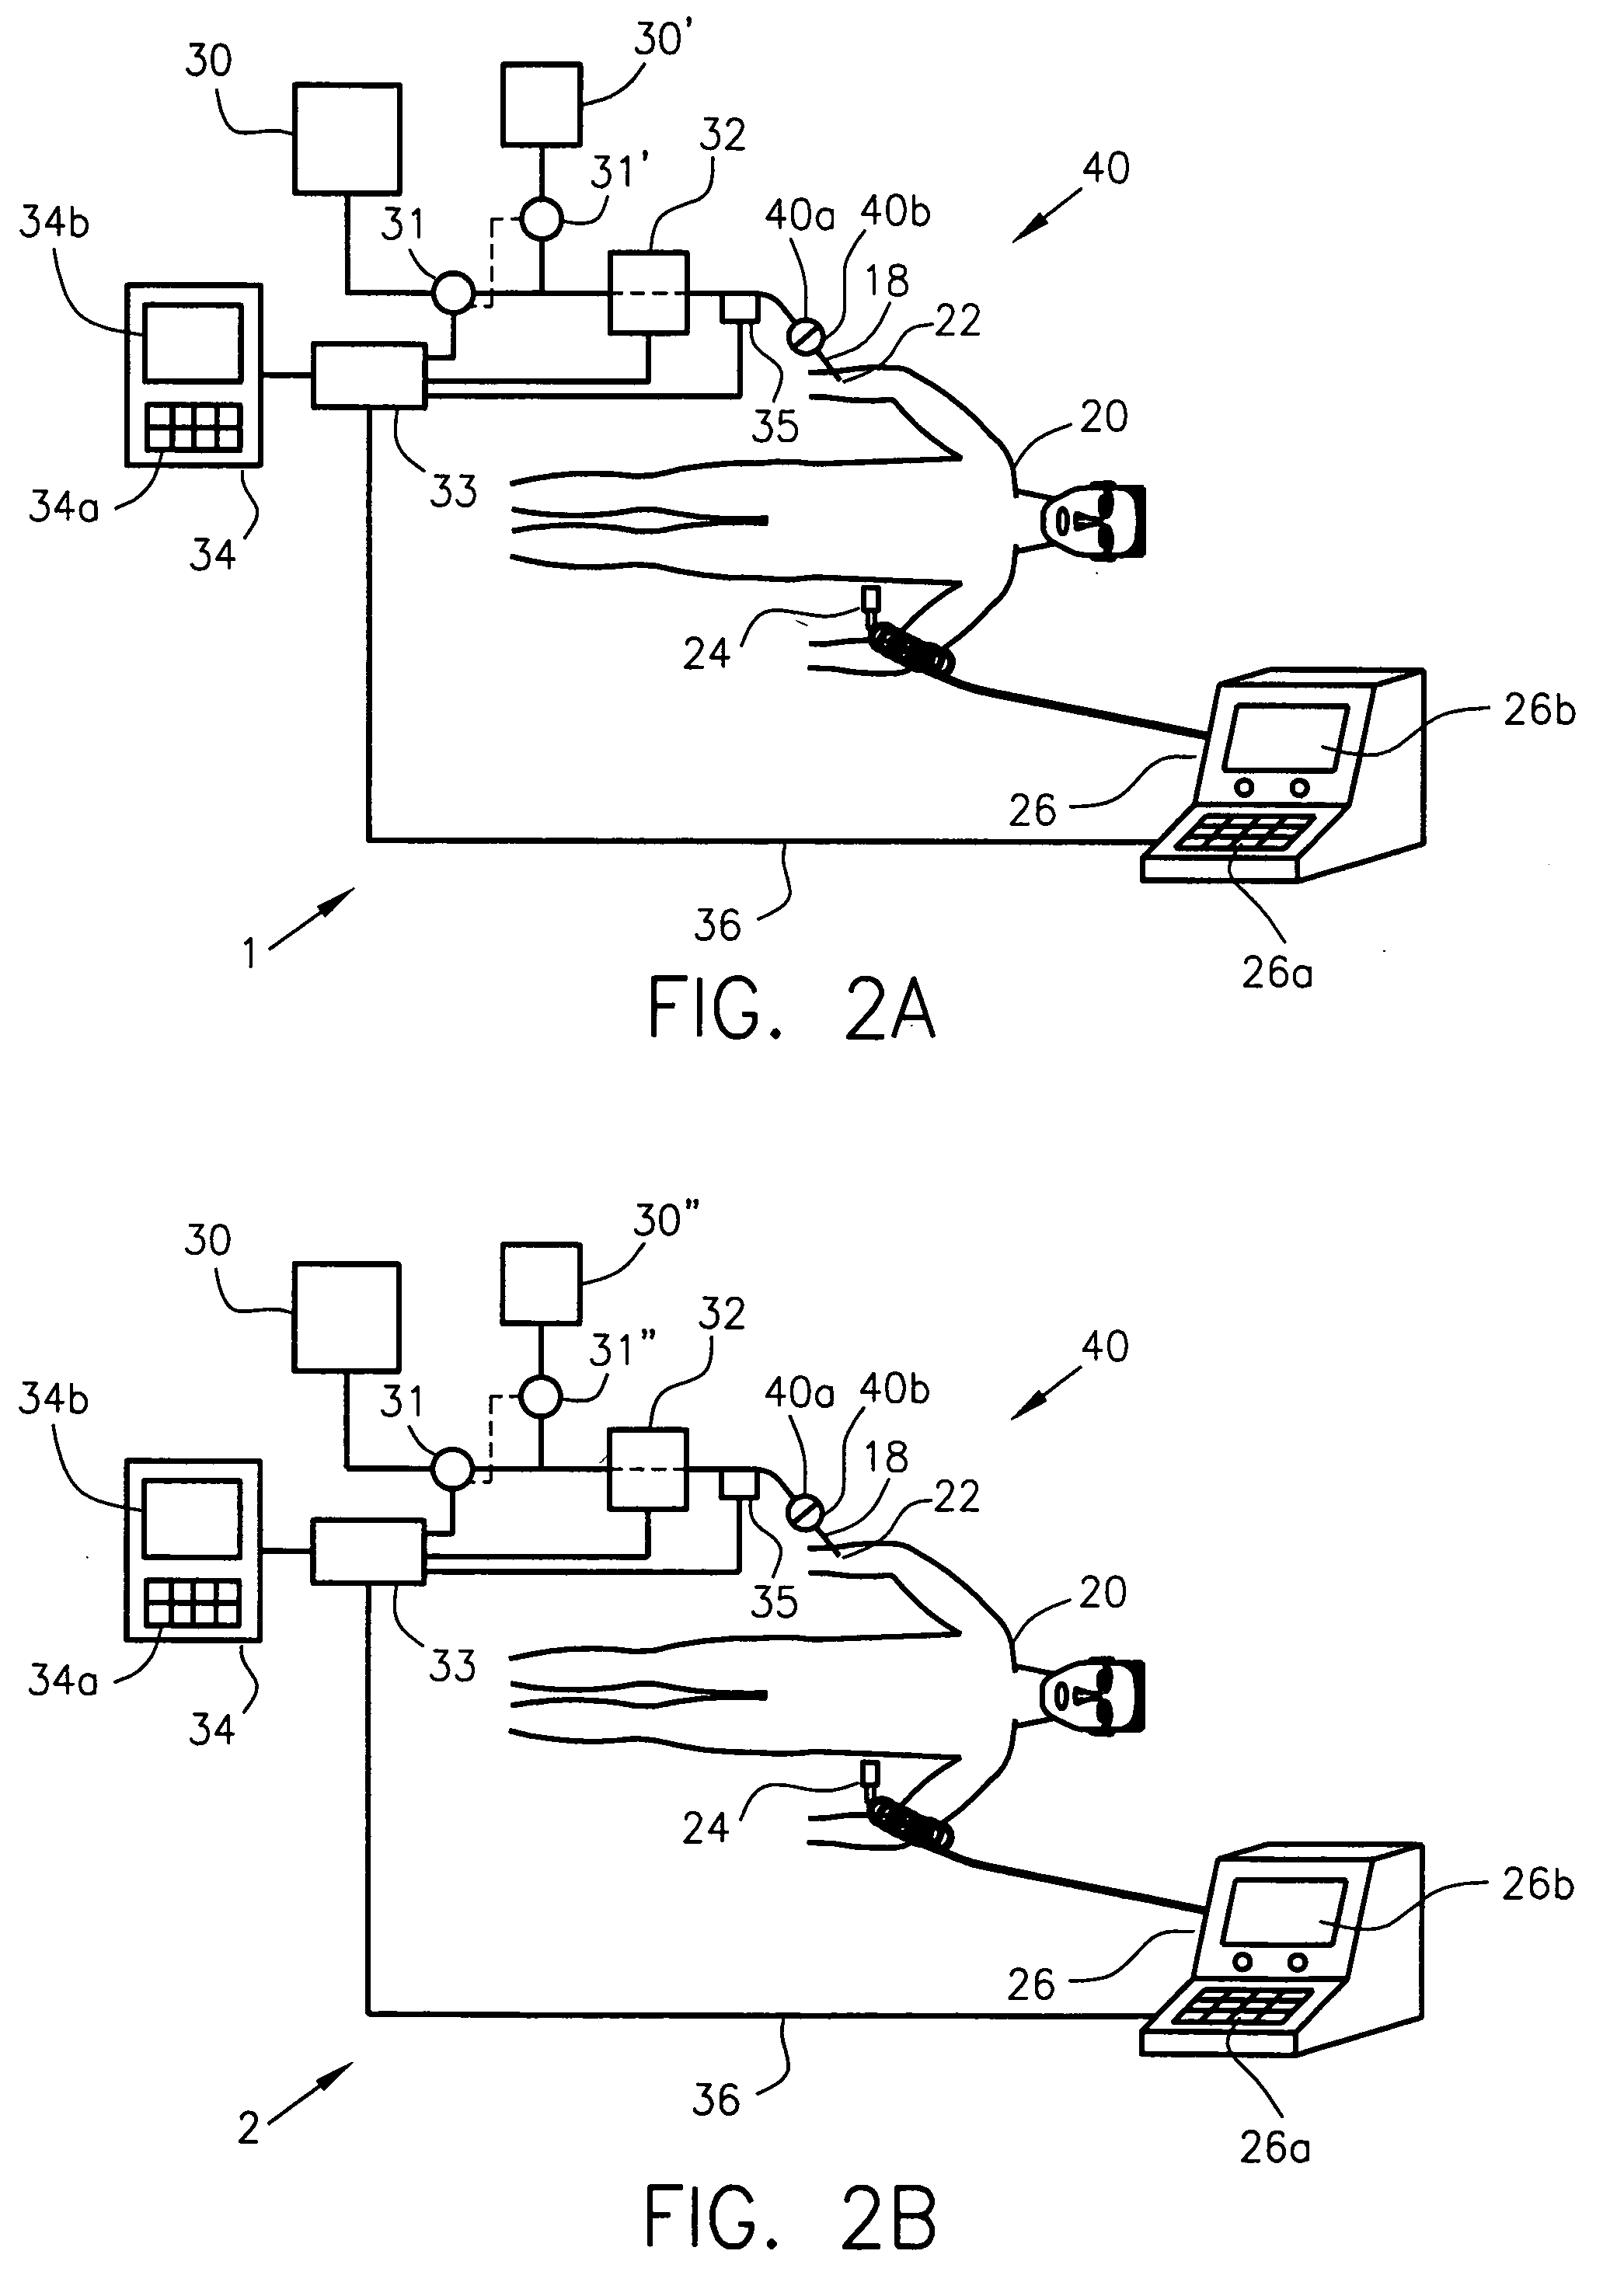 Apparatus, system and method for generating bubbles on demand